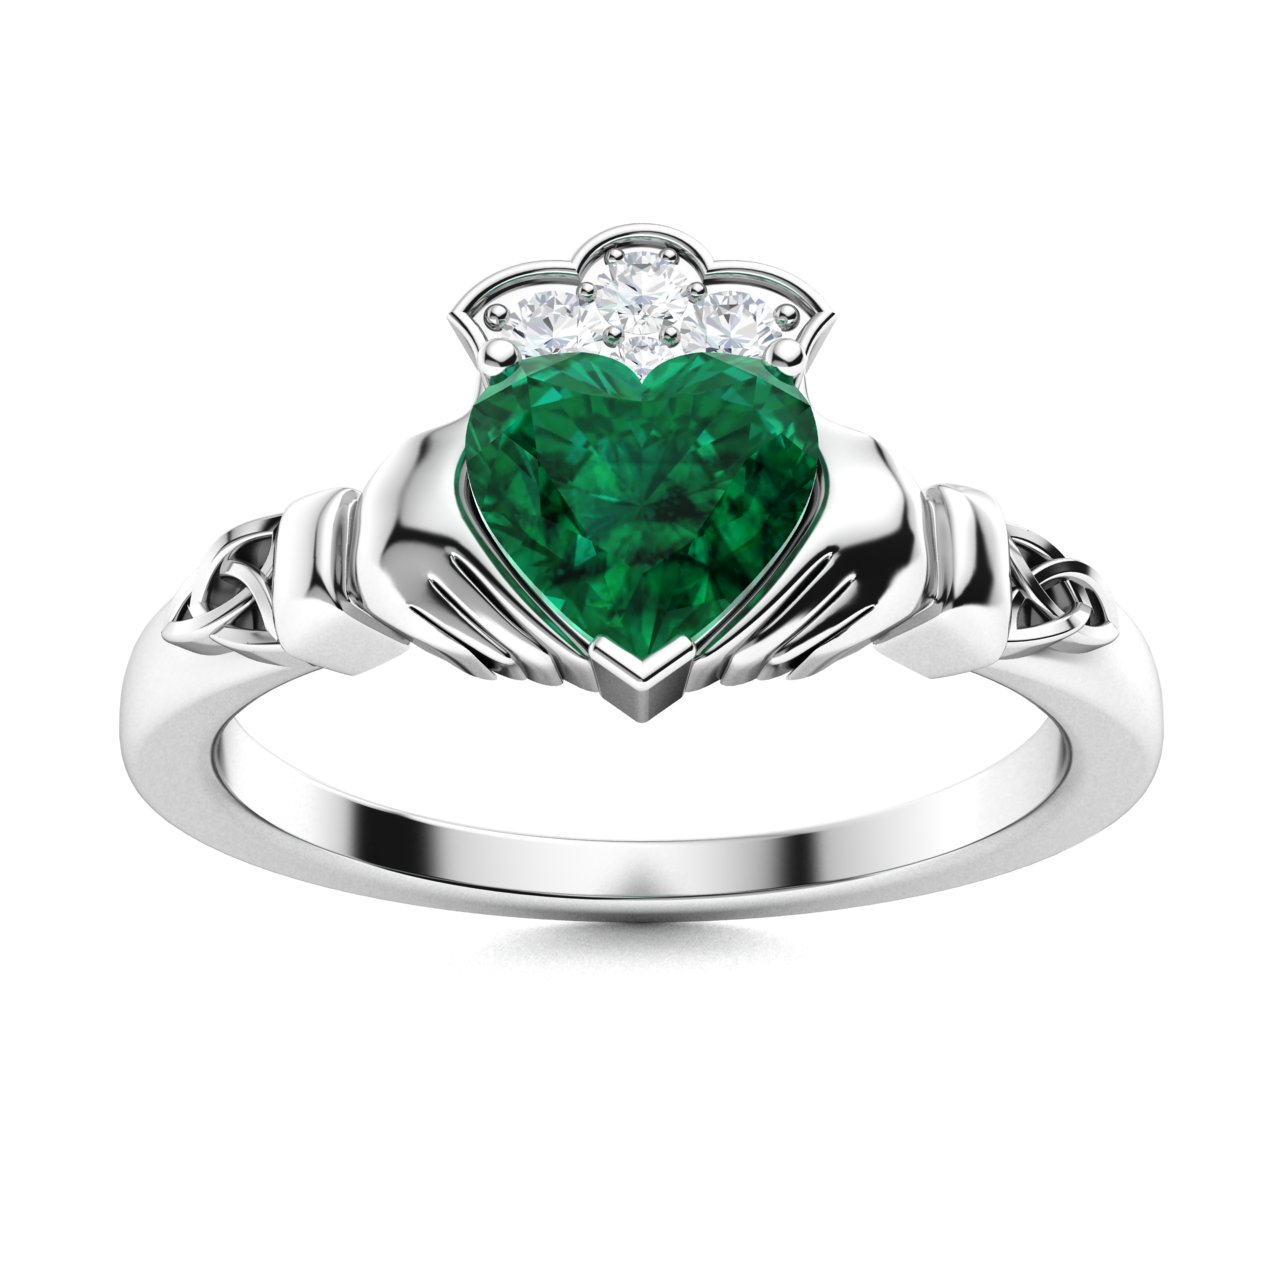 1.25 Ct Heart Cut Emerald & Diamond Claddagh Women's Ring 14k Two Tone Gold Over 